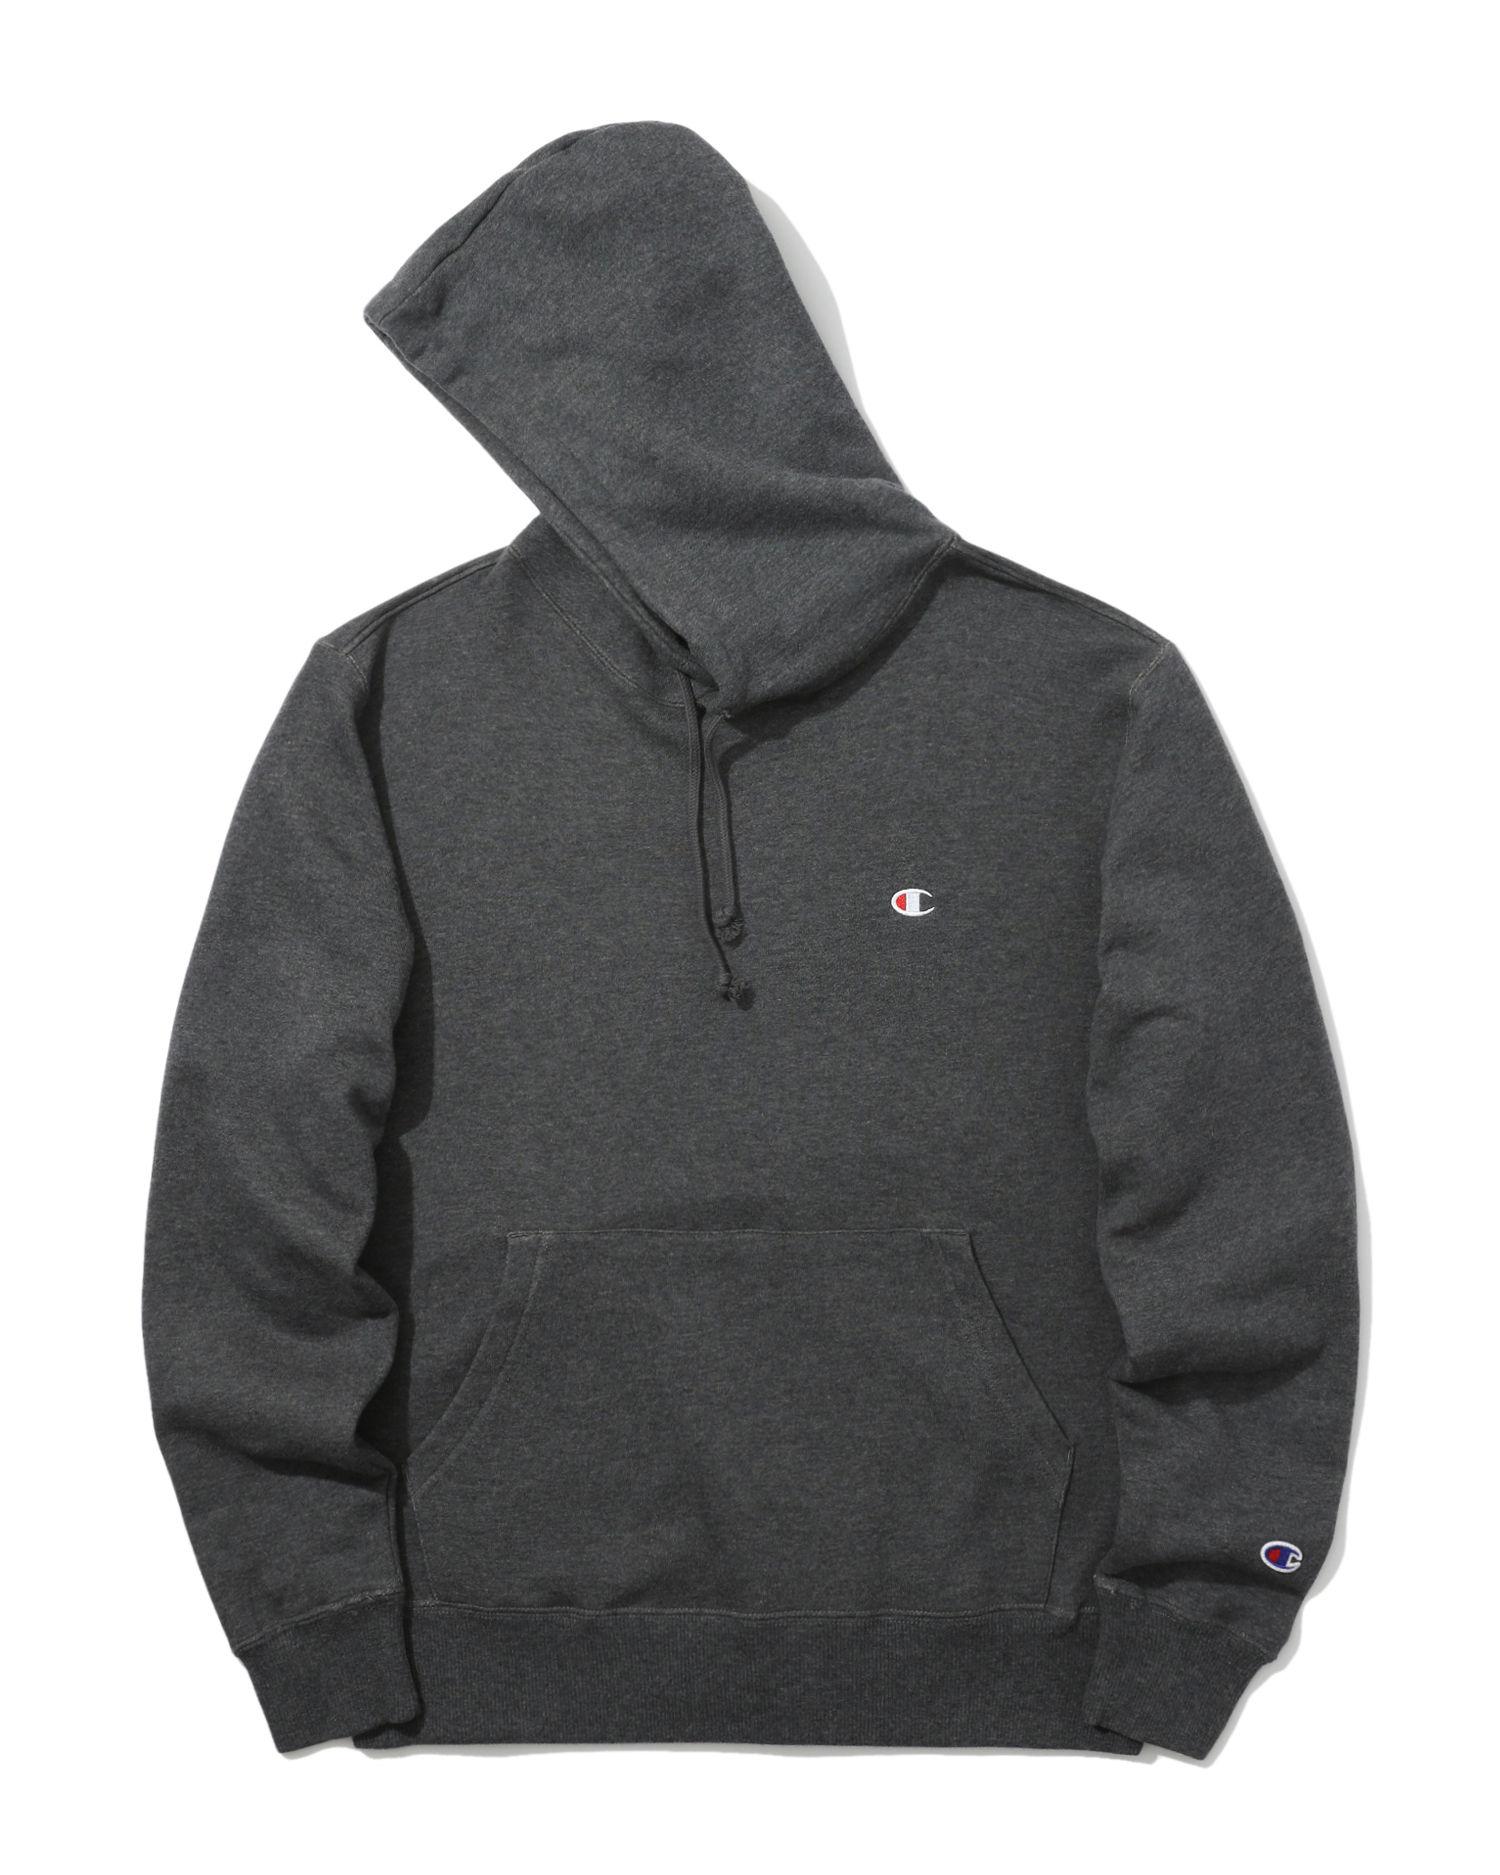 Logo hoodie by CHAMPION